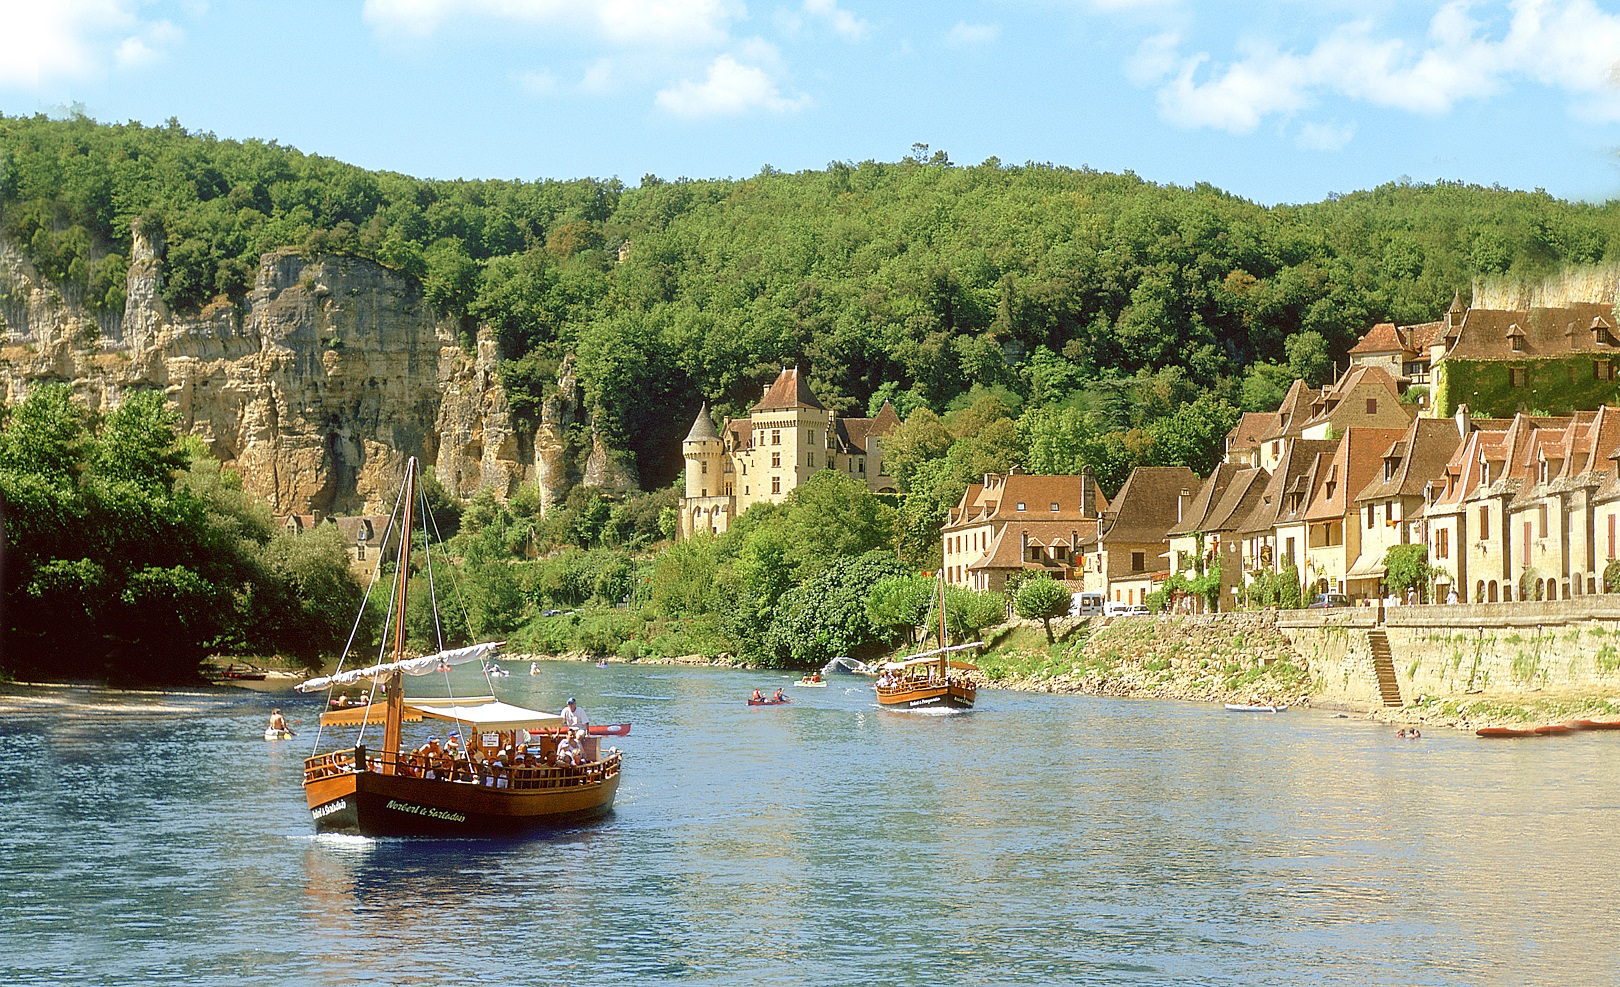 Boat on the Dordogne River with France Village in the background.